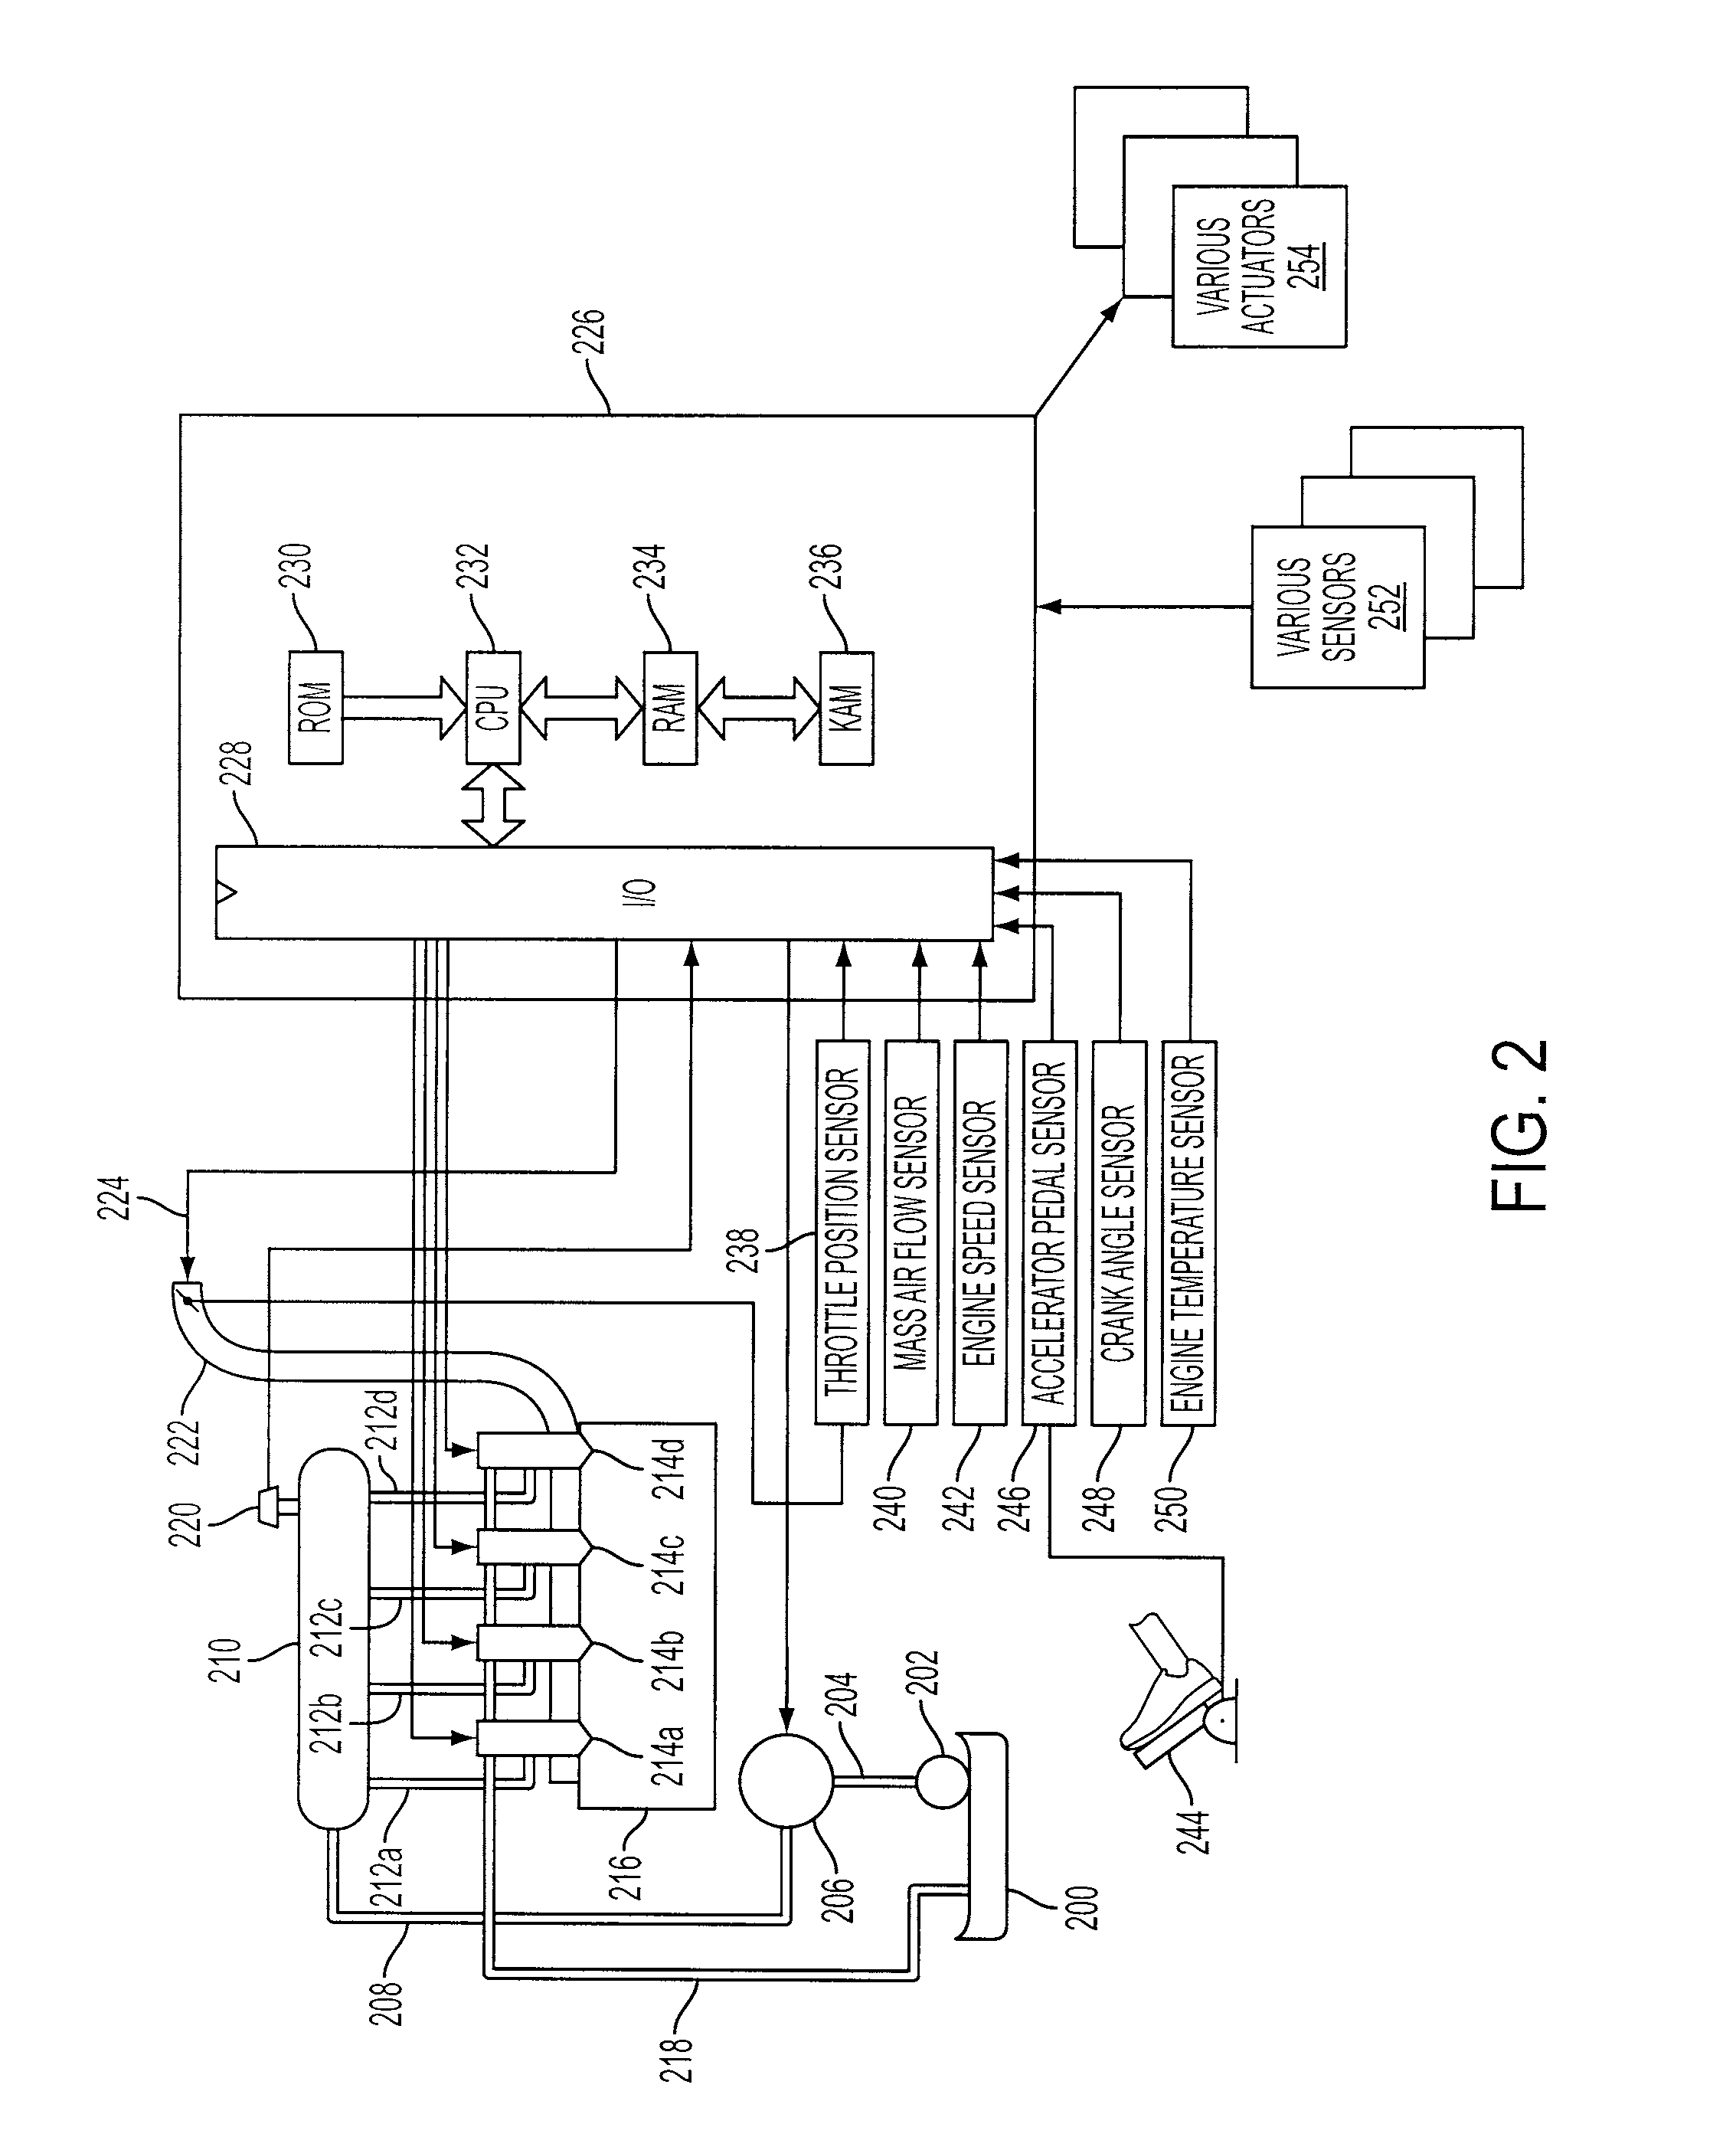 Method of Detecting and Compensating for Injector Variability with a Direct Injection System